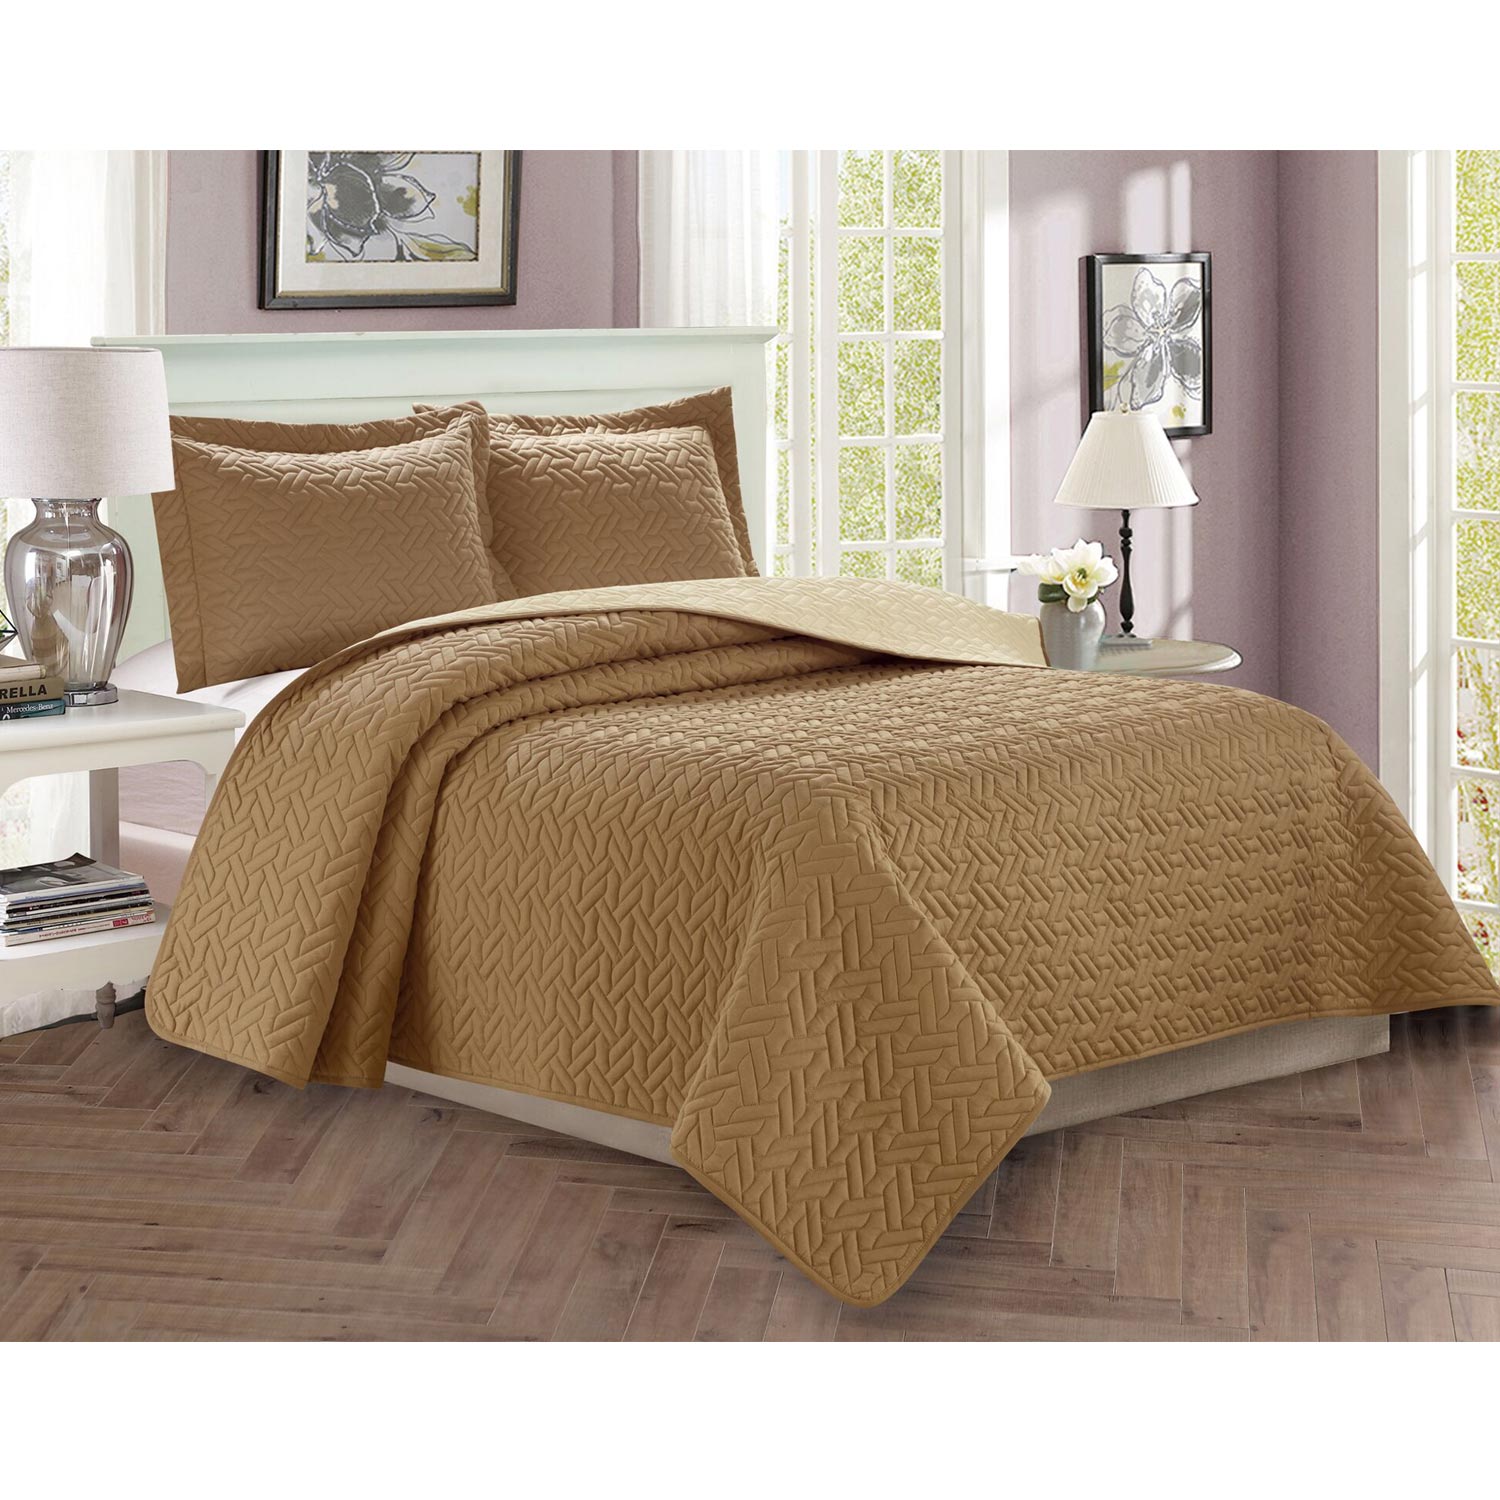 Luxury 3-Piece Bedspread Coverlet Majestic Design Quilted Set